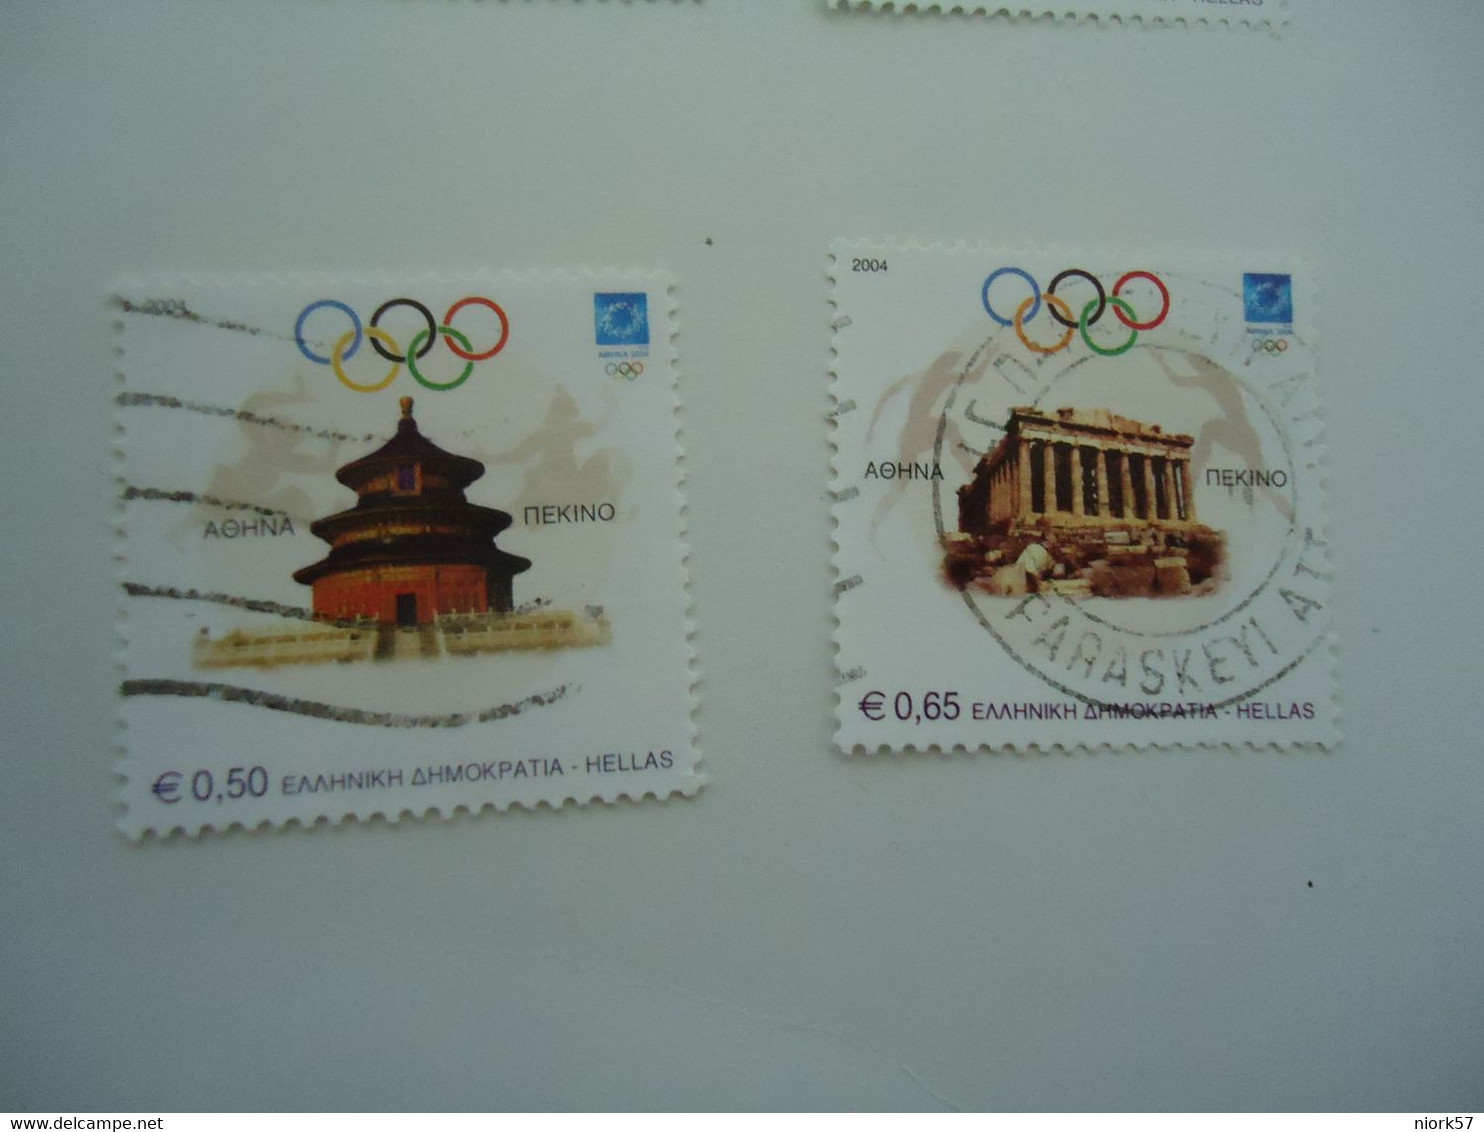 GREECE USED STAMPS SET 2 OLYMPIC GAMES 2004 ATHENS BEIGING - Verano 2004: Atenas - Paralympic